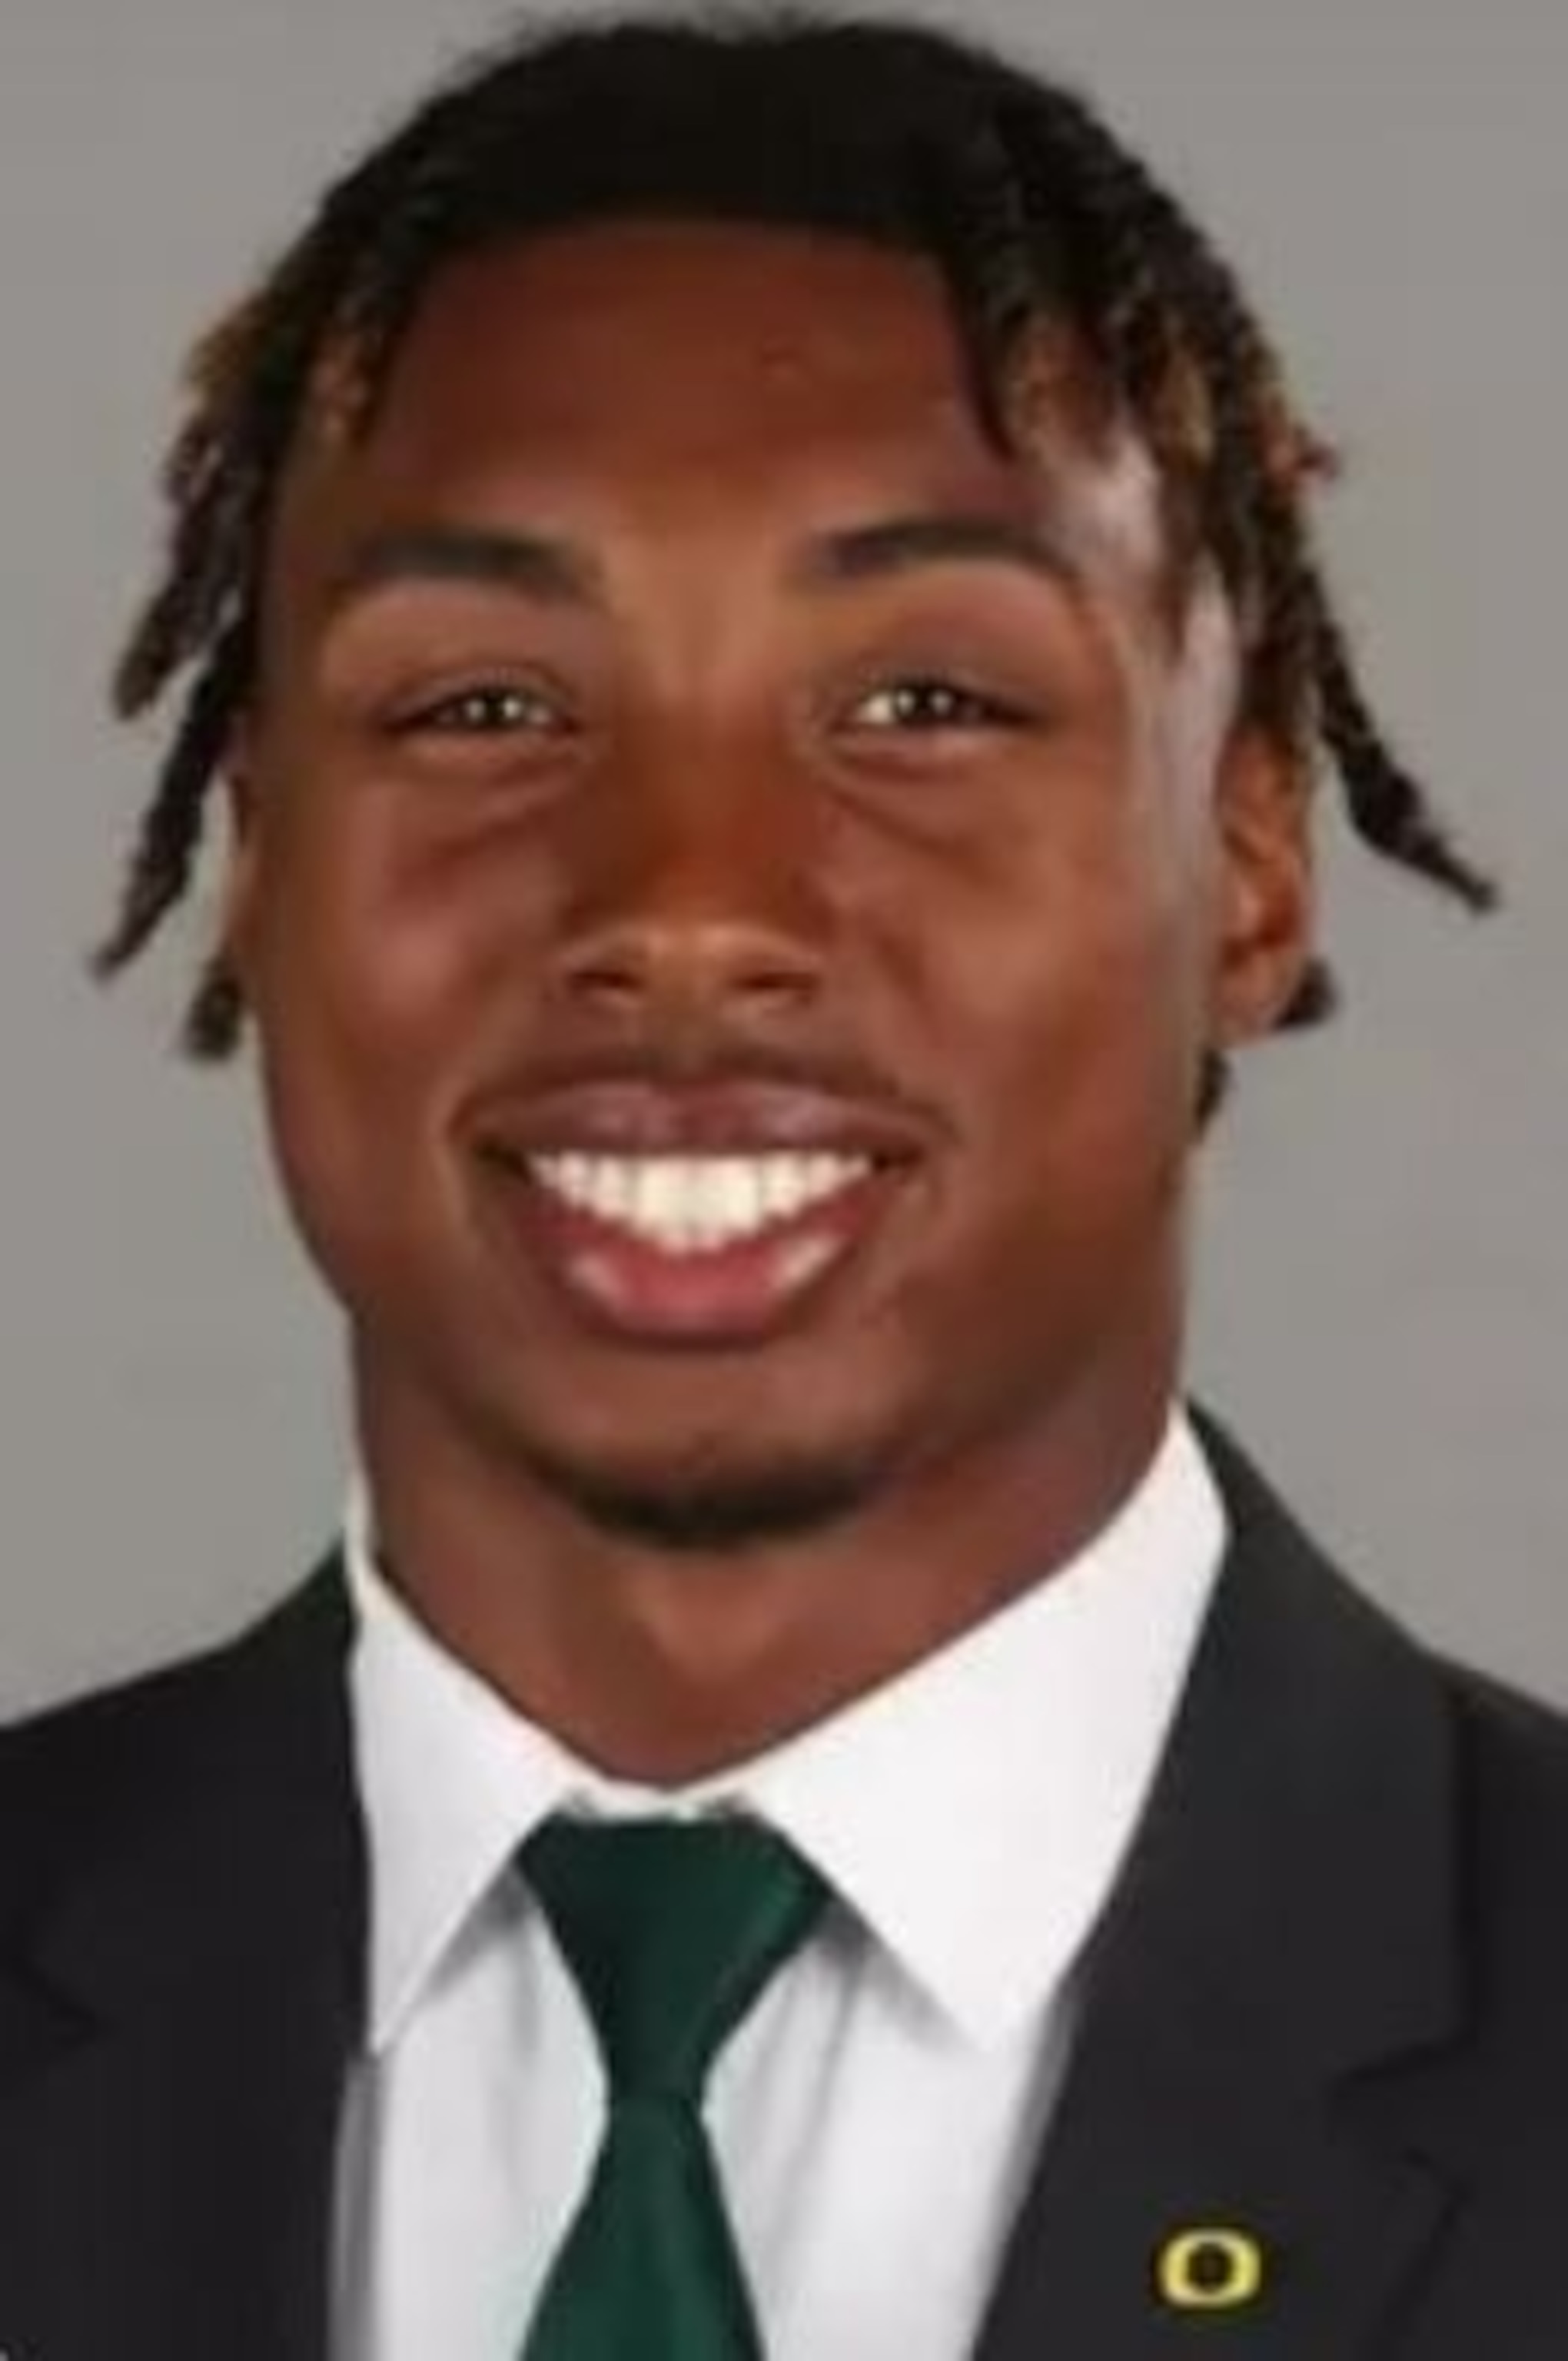 PHOTO: Daylen Auston, a college football player from the University of Oregon, has been arrested in connection to a fatal hit-and-run crash that killed a 46-year-old man, according to the Eugene Police Department. 